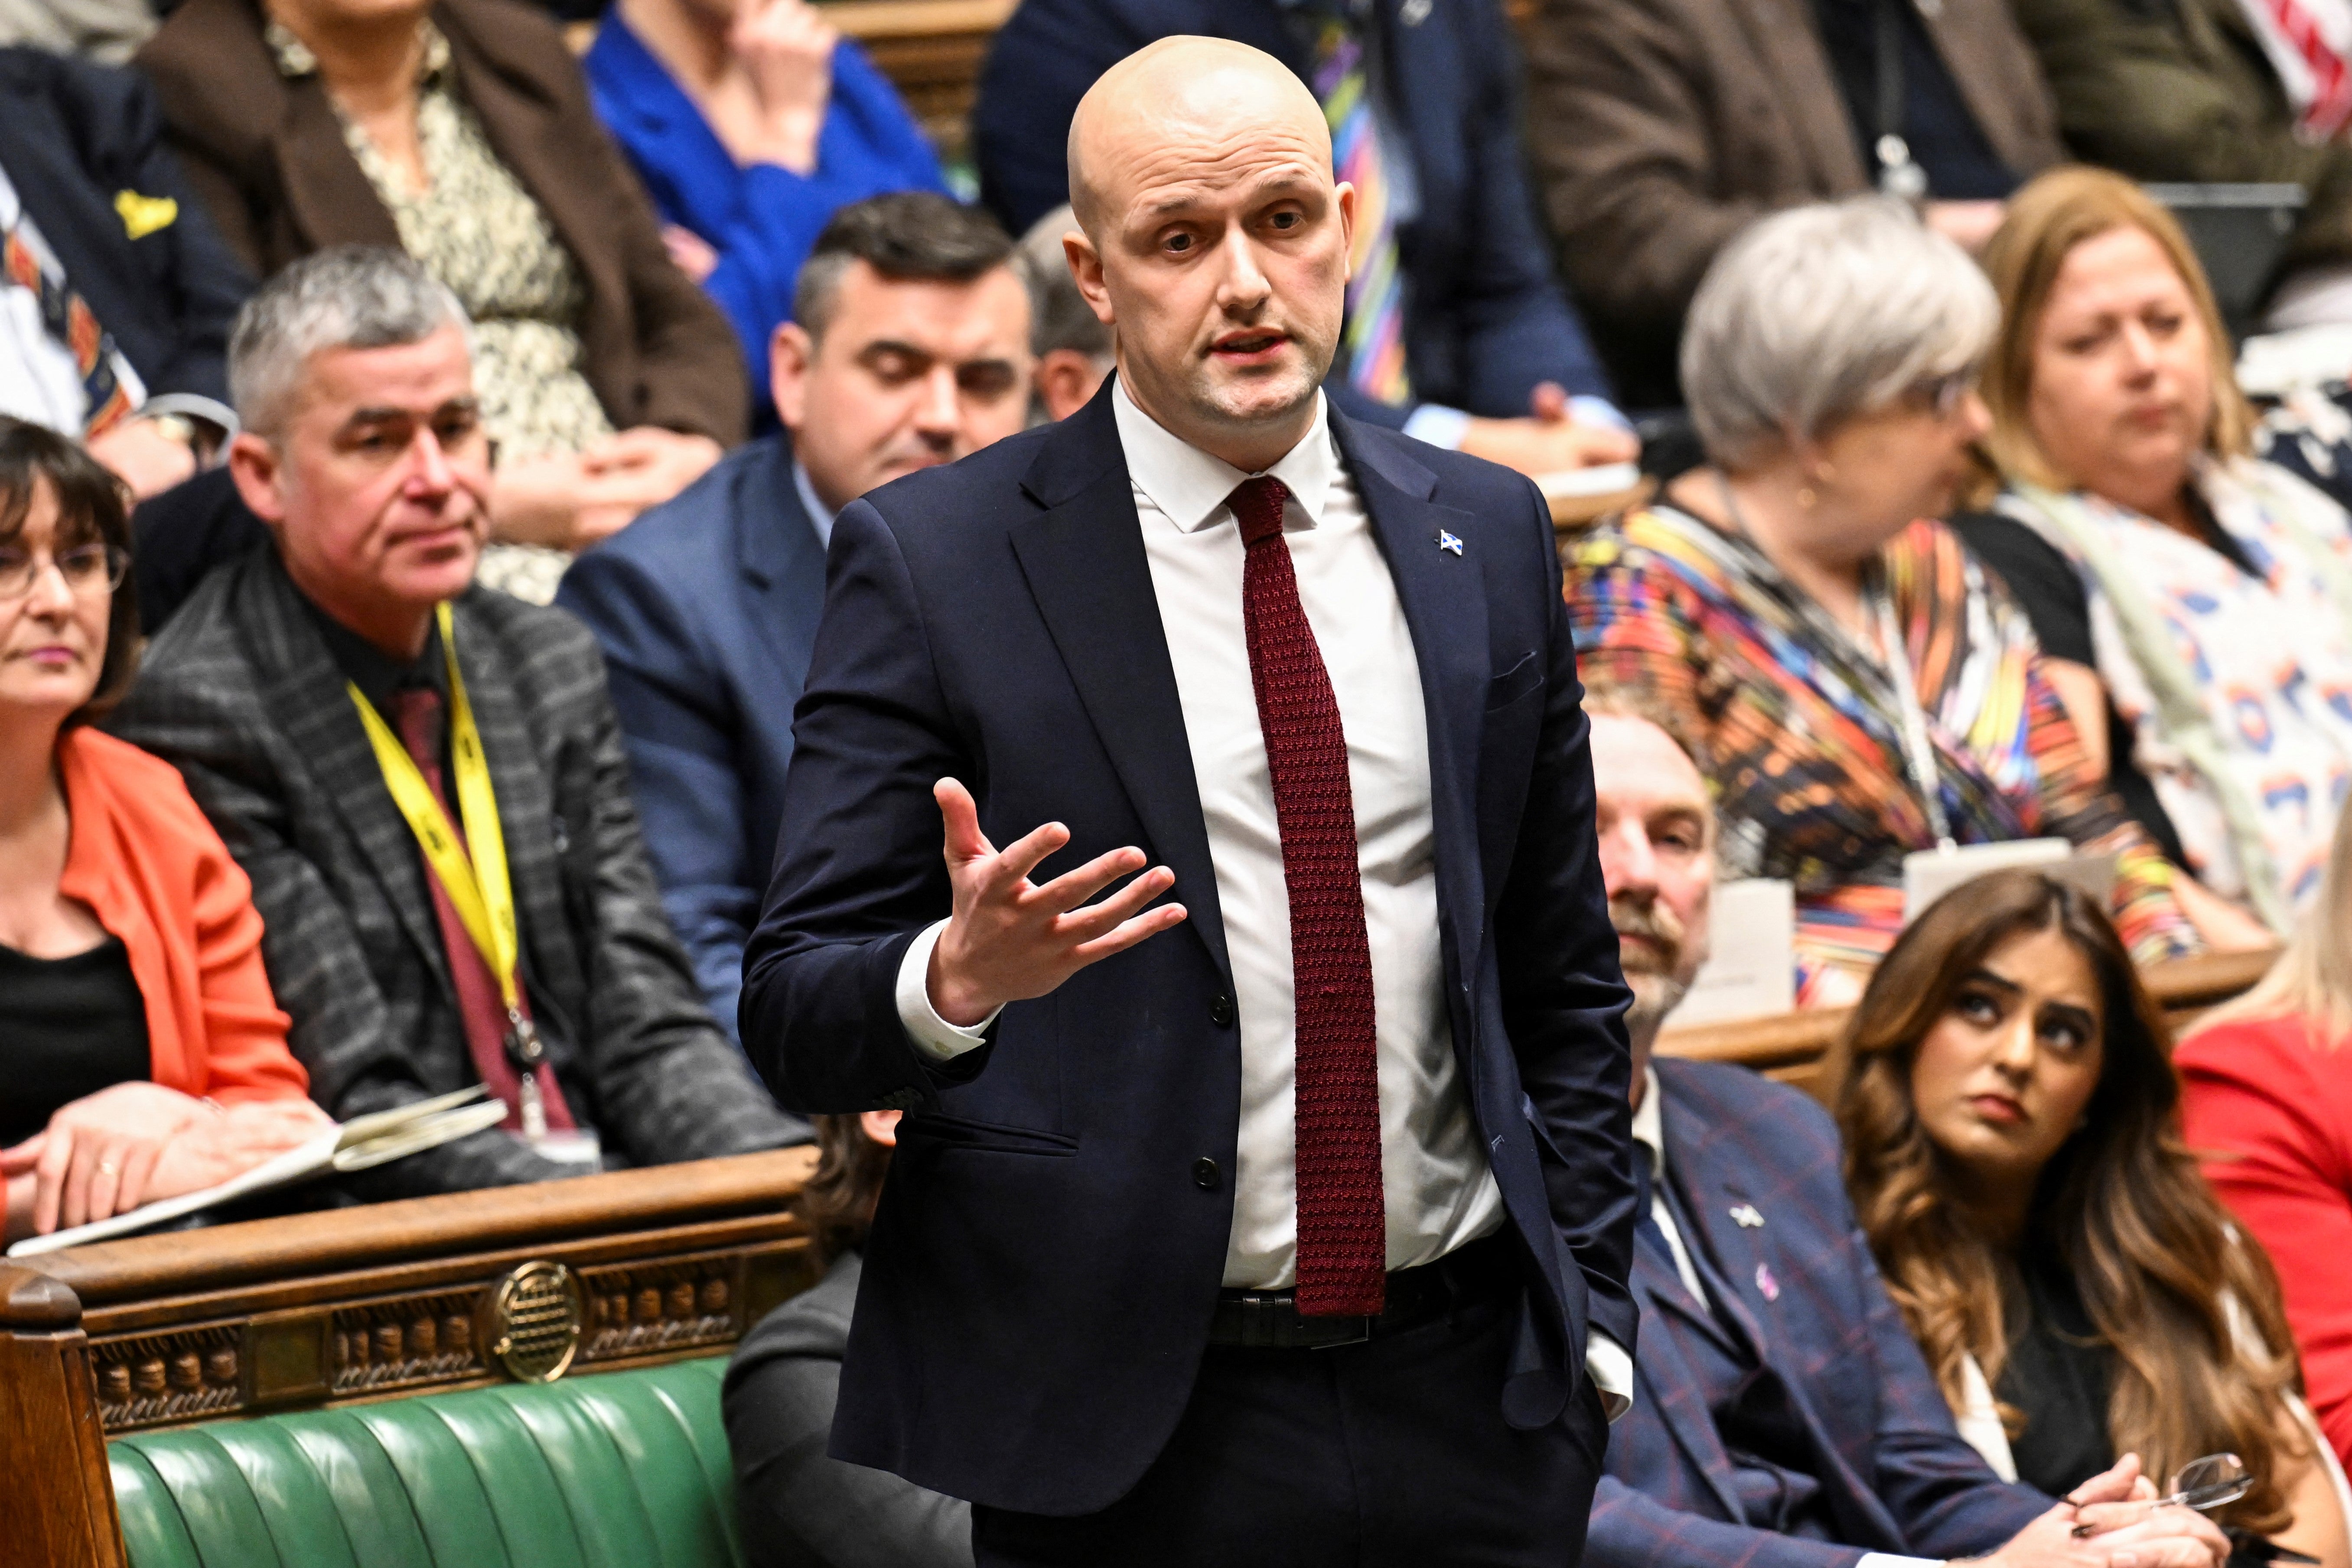 The SNP’s Westminster leader Stephen Flynn was furious after the Commons speaker allowed MPs to vote on a Labour ceasefire motion